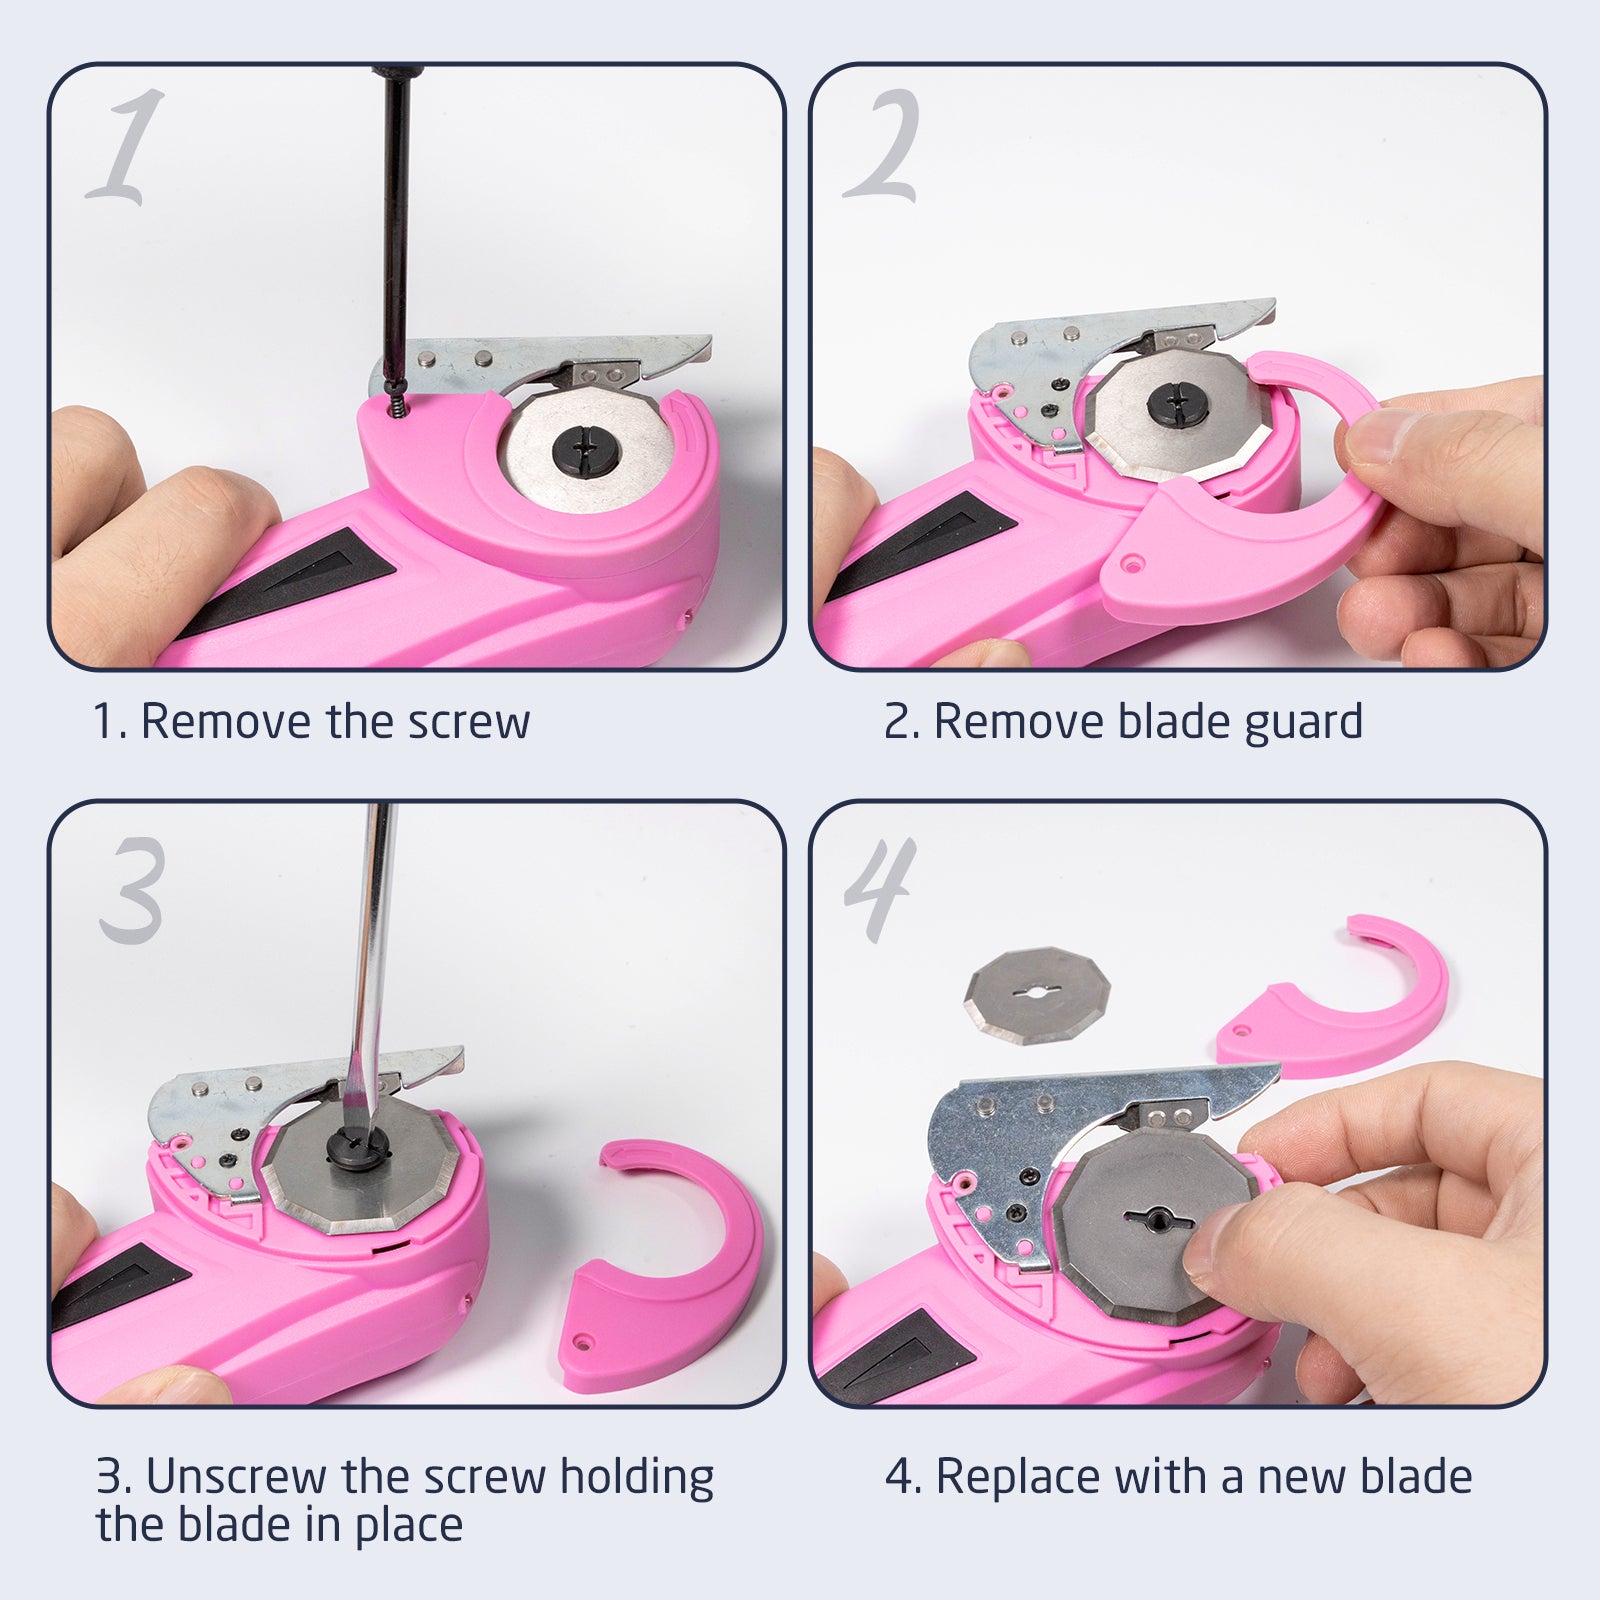 Cordless Electric Scissors Cutter Tool - Rotary Multi-Cutting Power Tools  Rechargeable with Safety Lock Sharp Blade for Box Fabric Cardboard Carpet